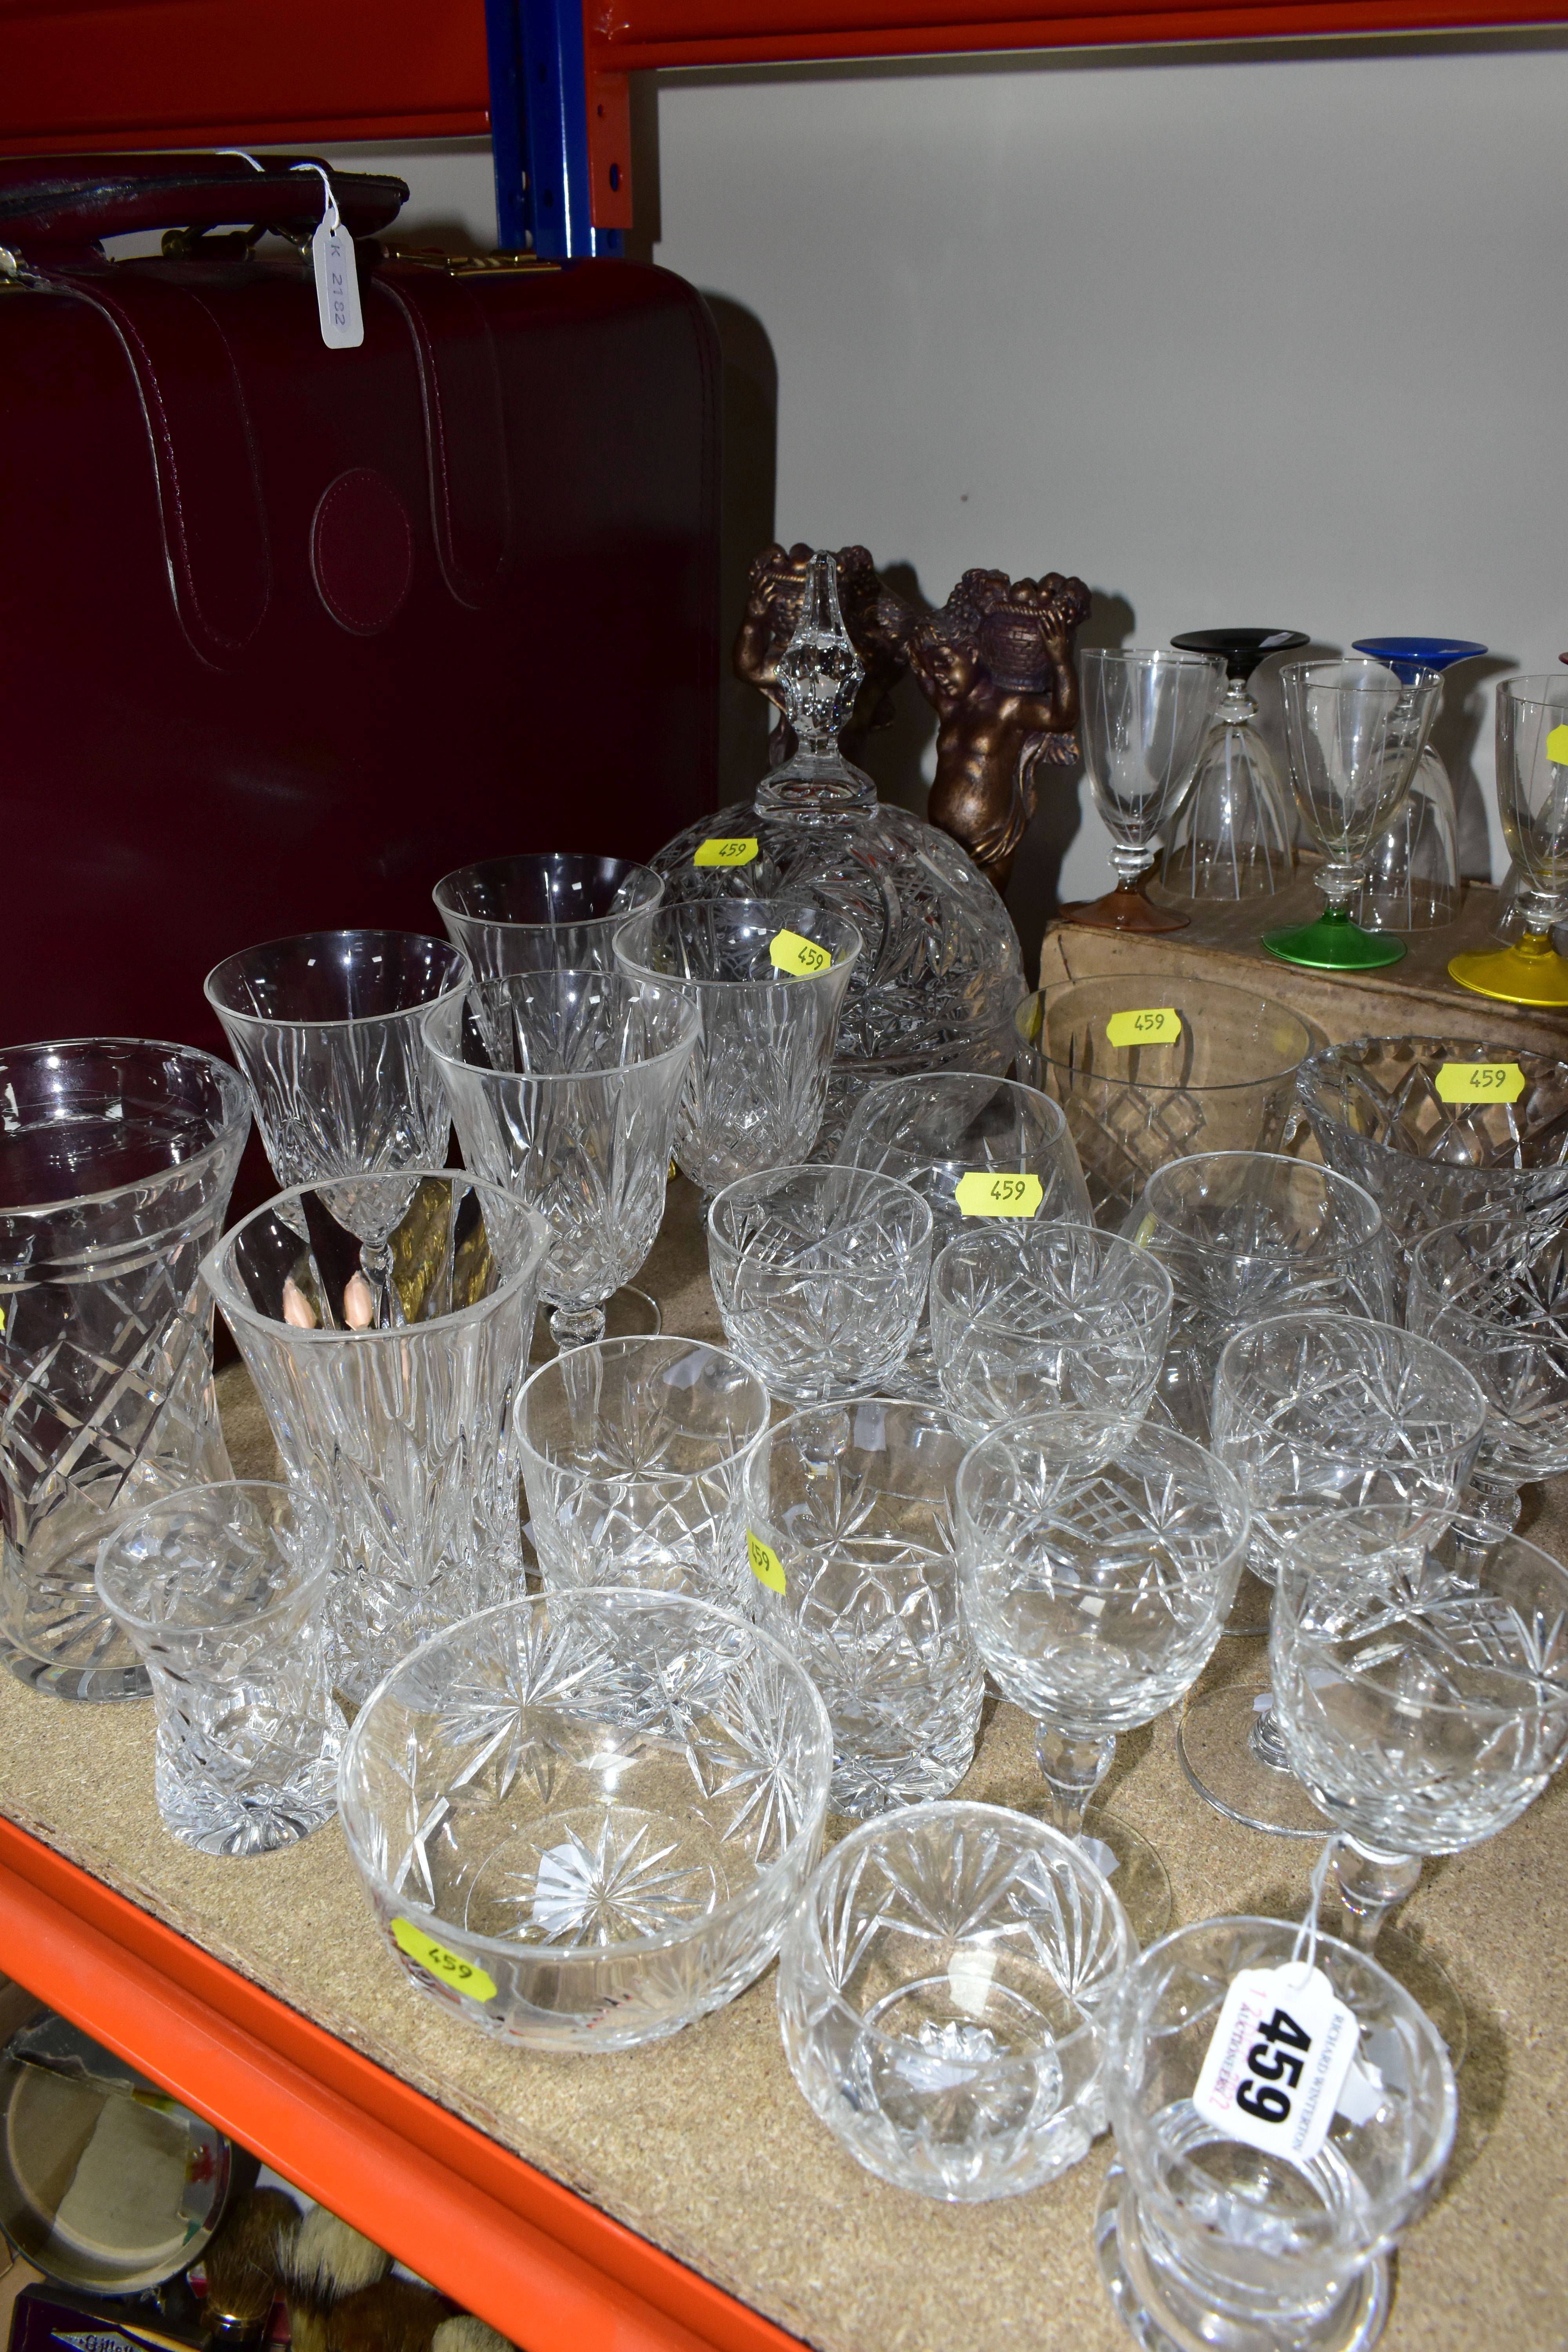 A SMALL QUANTITY OF ASSORTED DRINKING GLASSES AND OTHER GLASSWARE, AN AMIET BRIEFCASE AND A PAIR